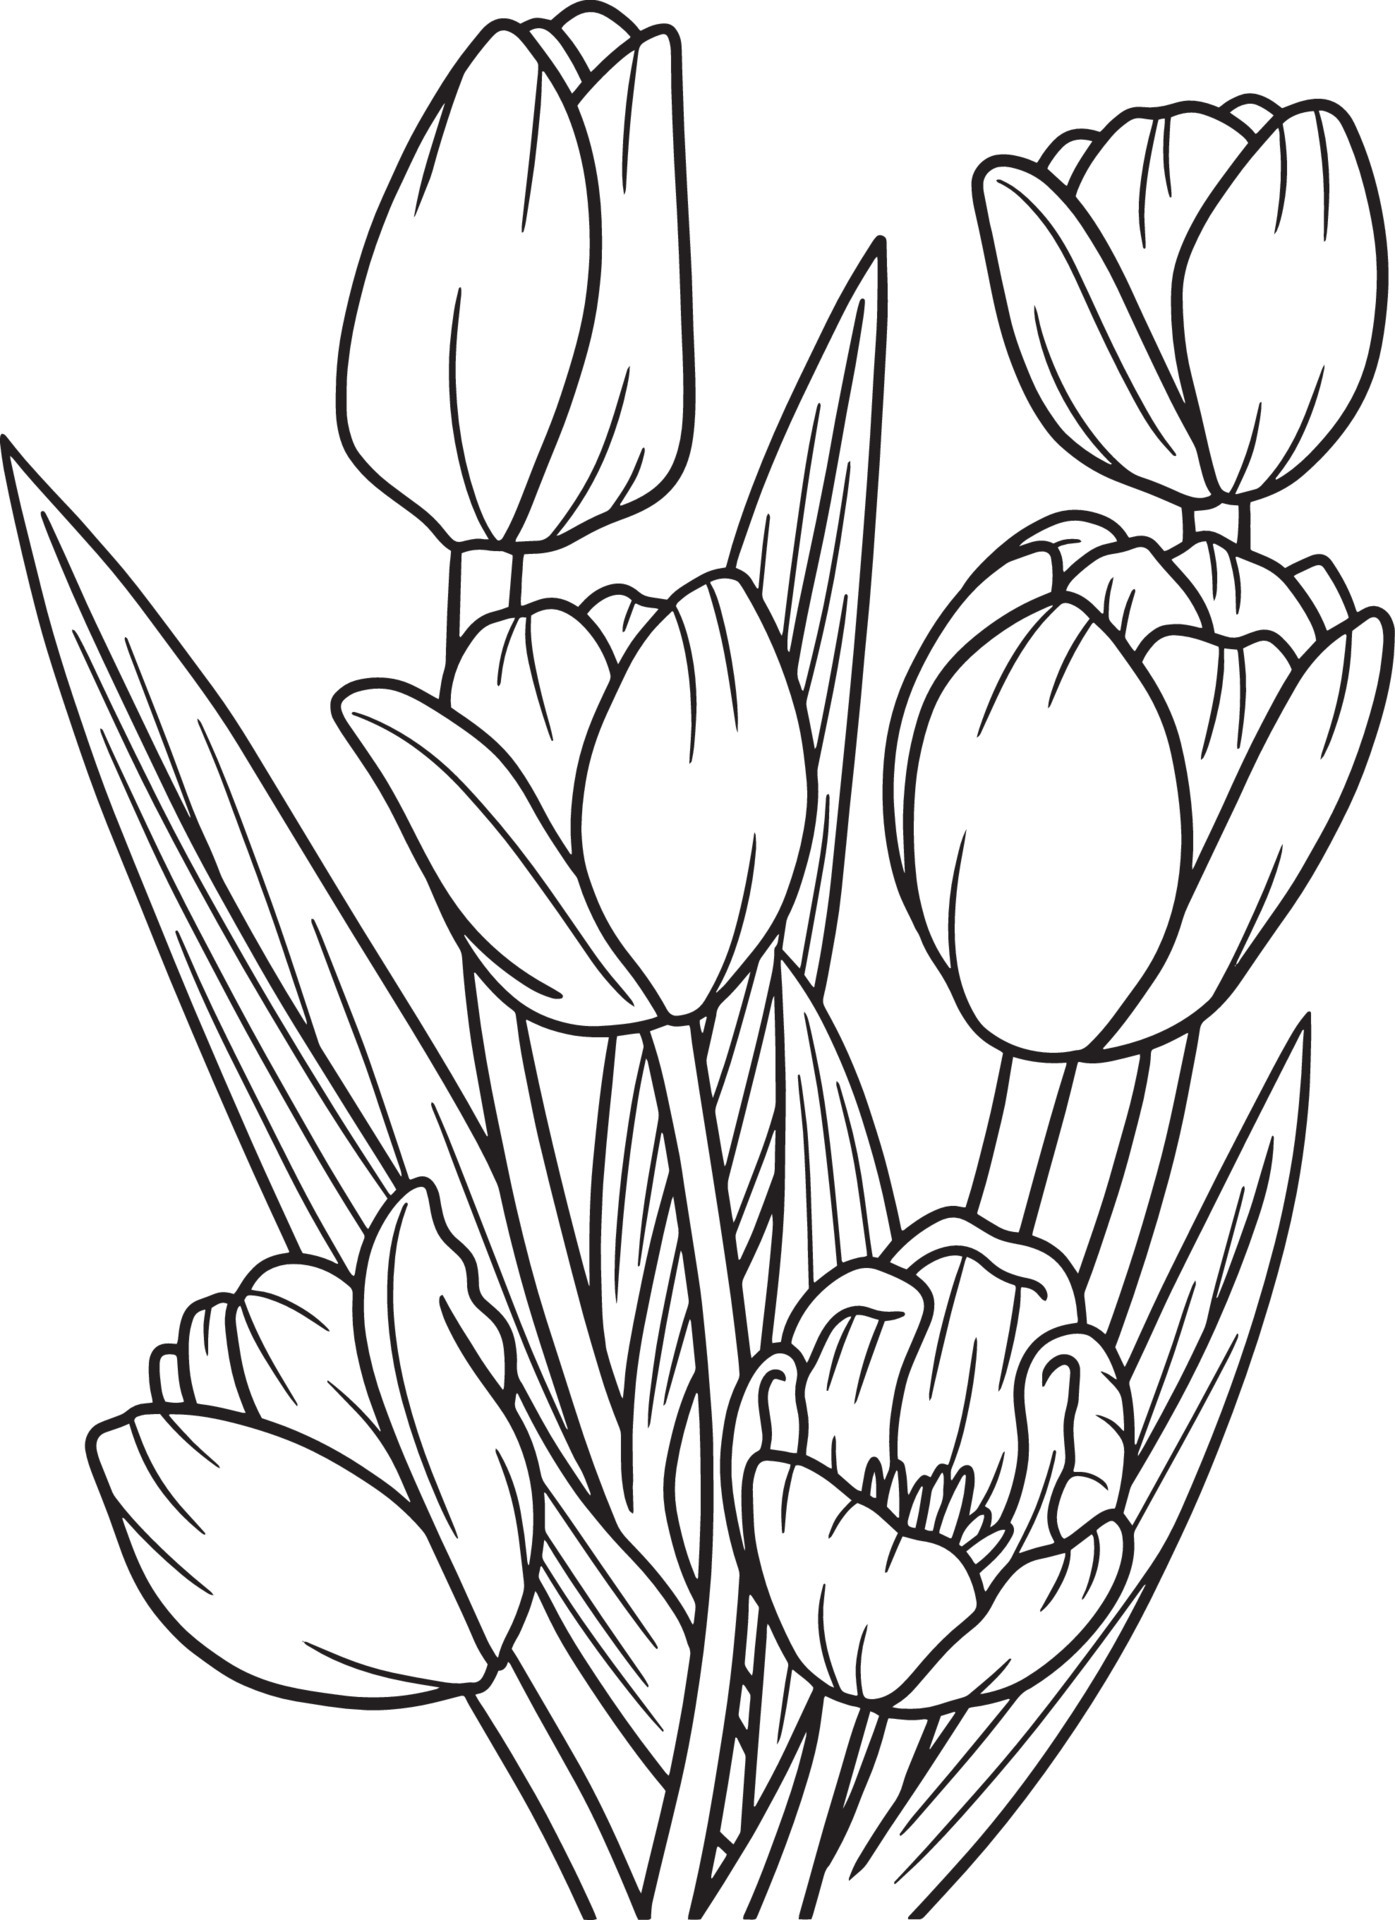 Fabulous tulips coloring book for children 5-6 years old